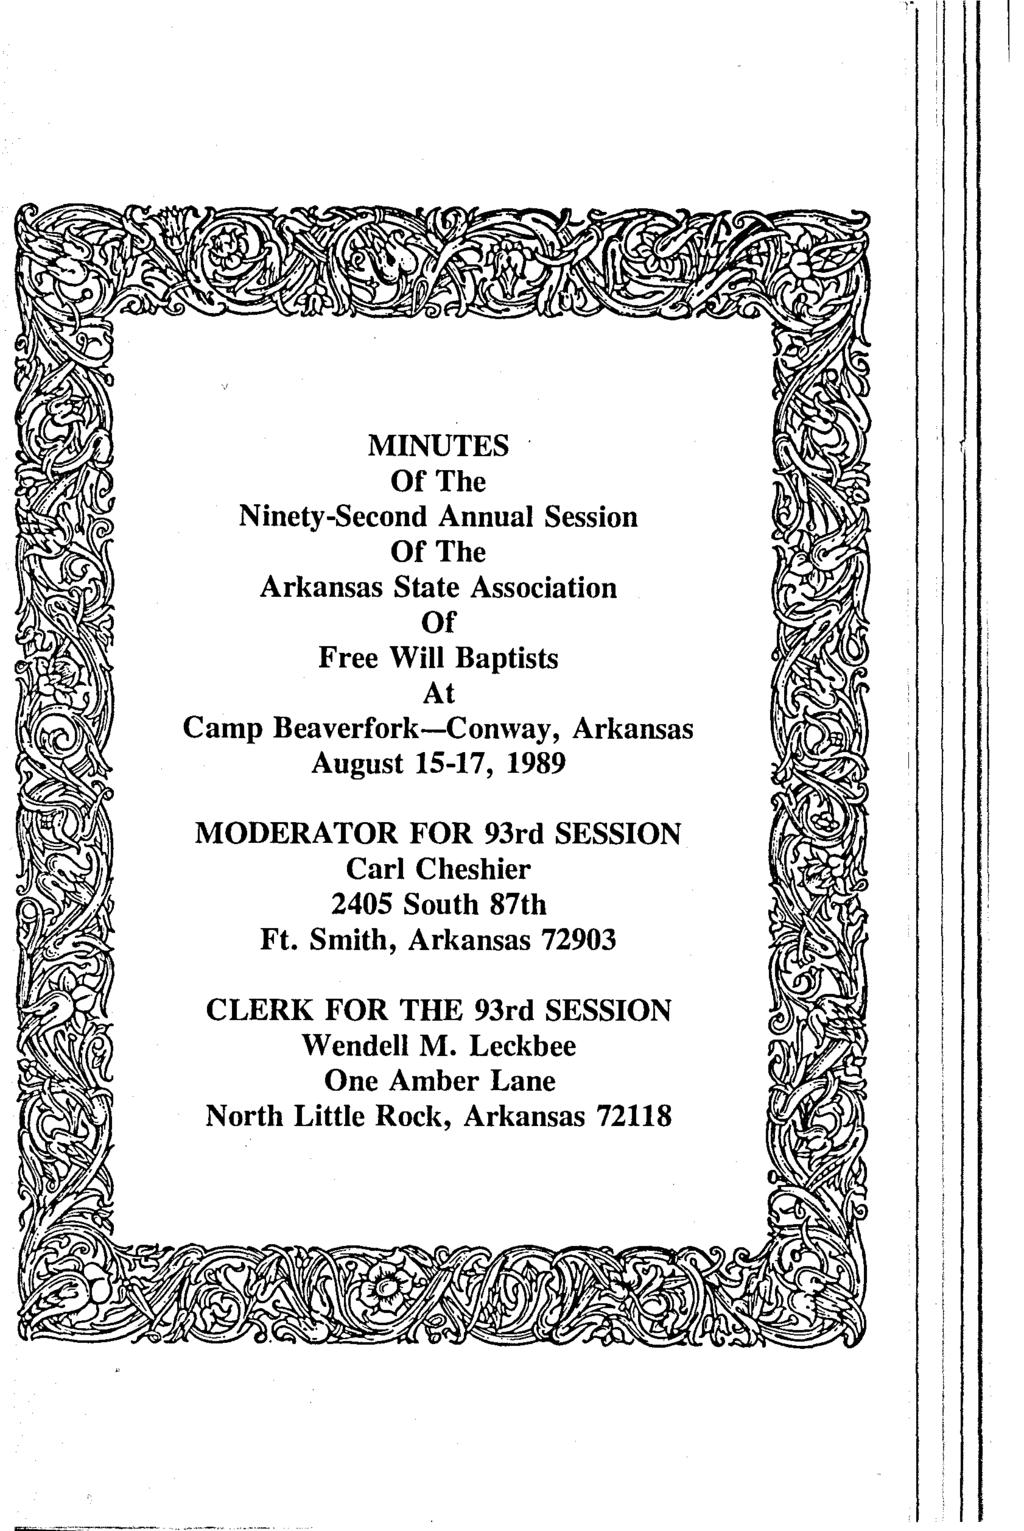 MNUTES Of The Nnety-Second Annual Sesson Of The Arkansas State Assocaton Of Free Wll Baptsts At Camp Beaverfork-Conway, Arkansas August 15-17, 1989 MODERATOR FOR